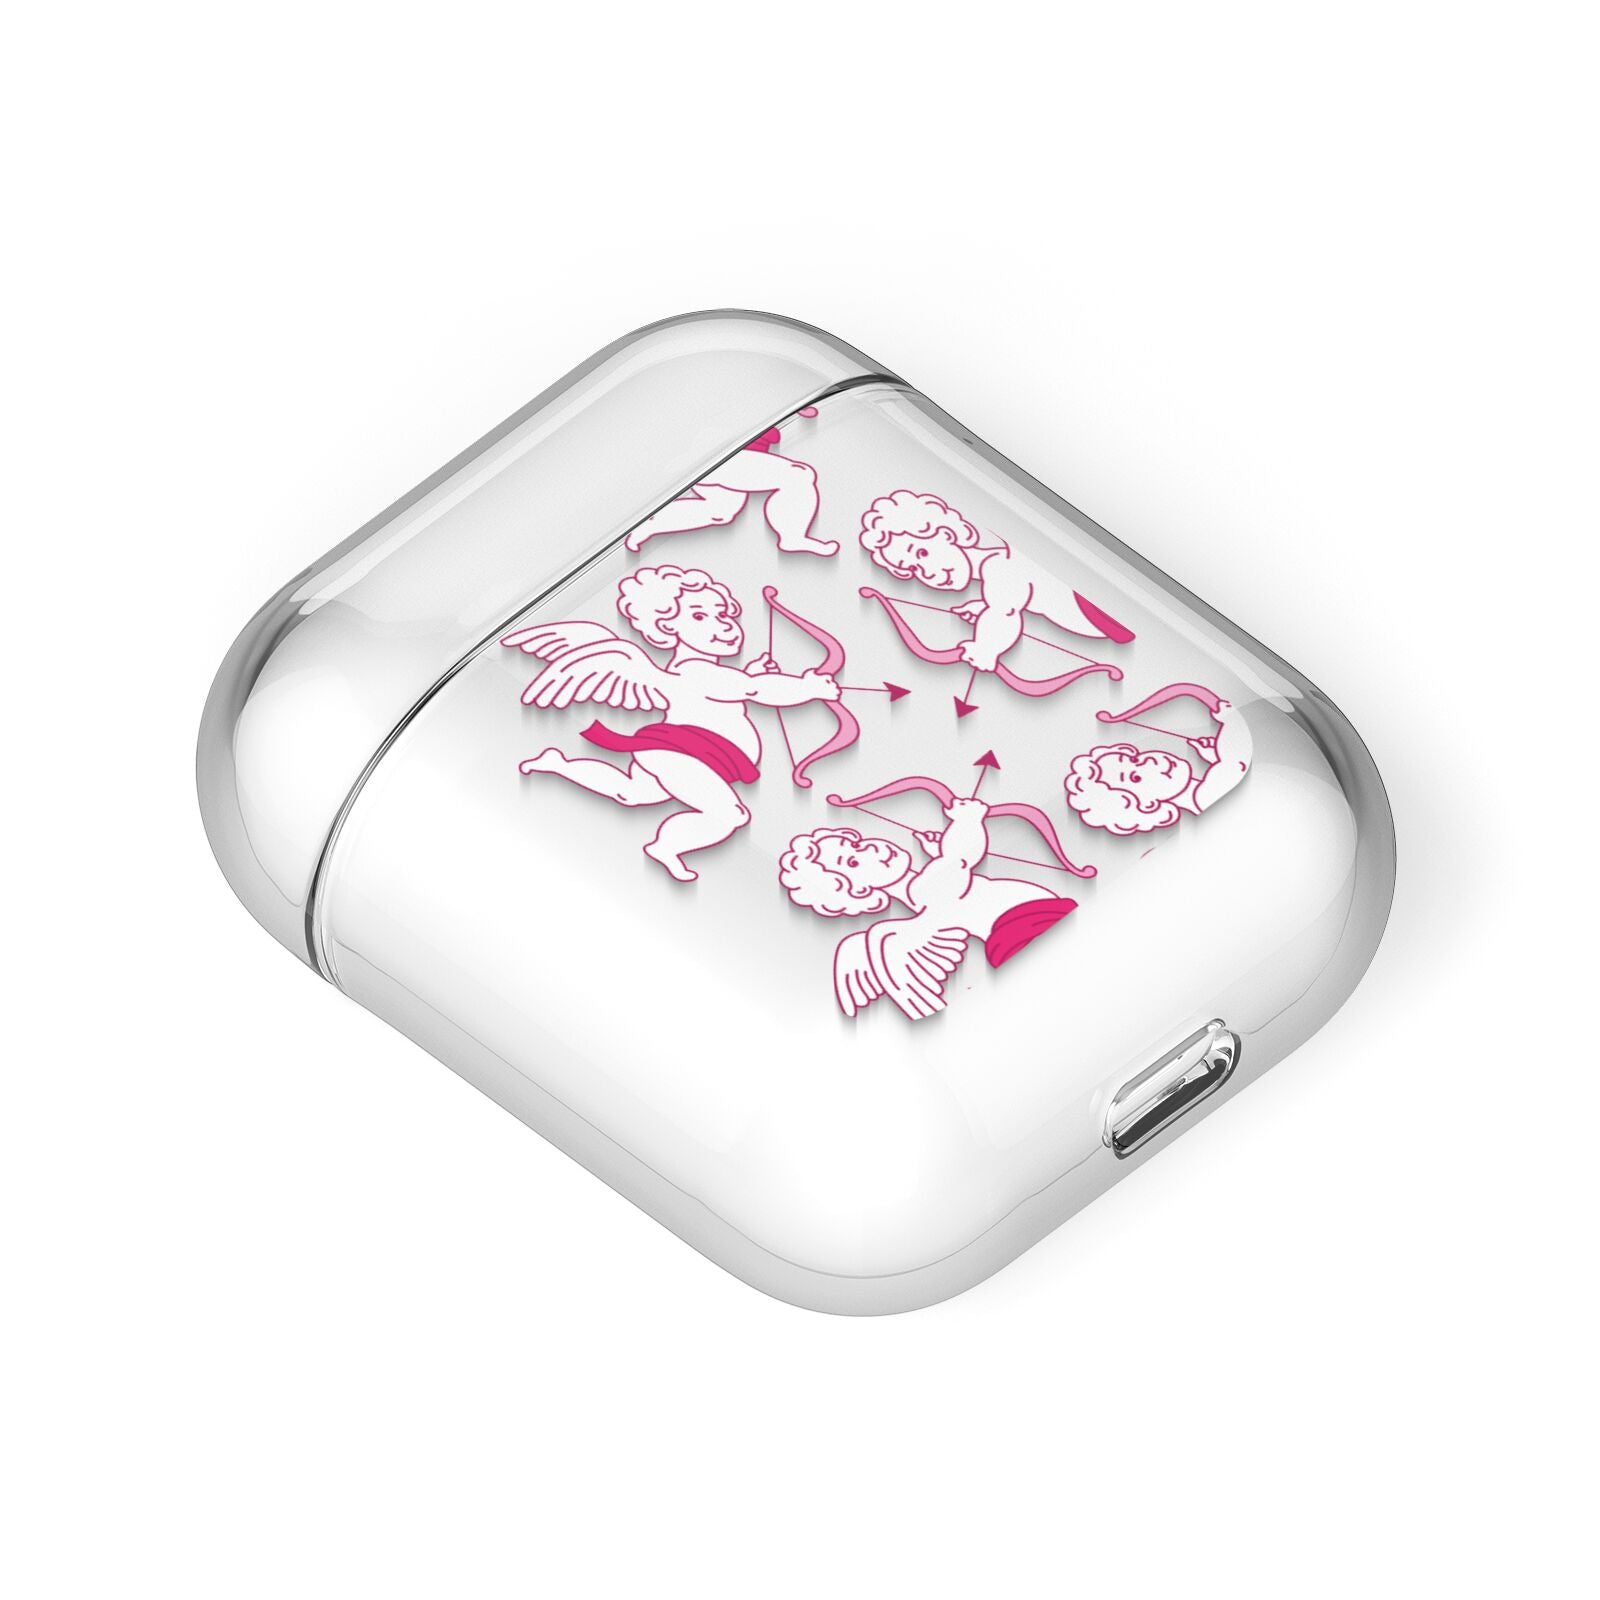 Cupid AirPods Case Laid Flat